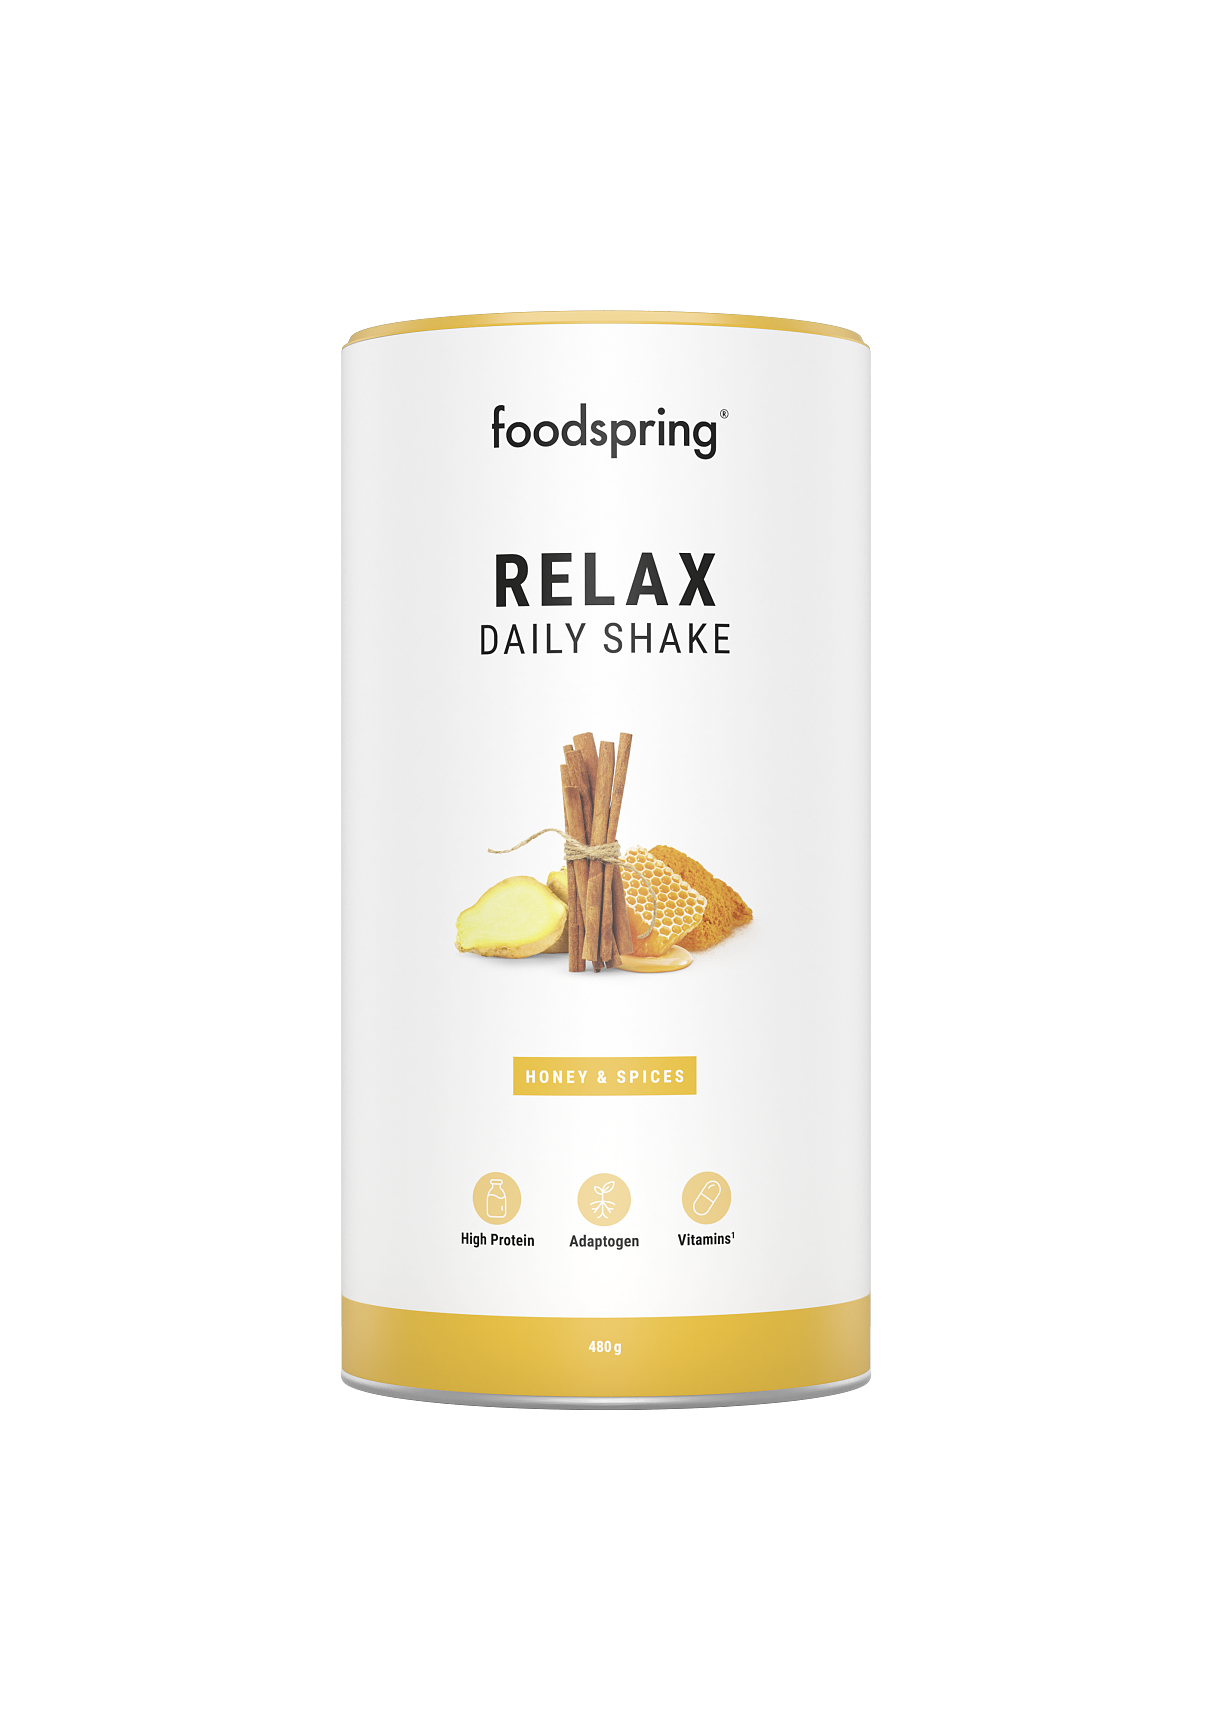 foodspring_Daily Shake_Relax_Honey and Spices_EUR 32,99_01